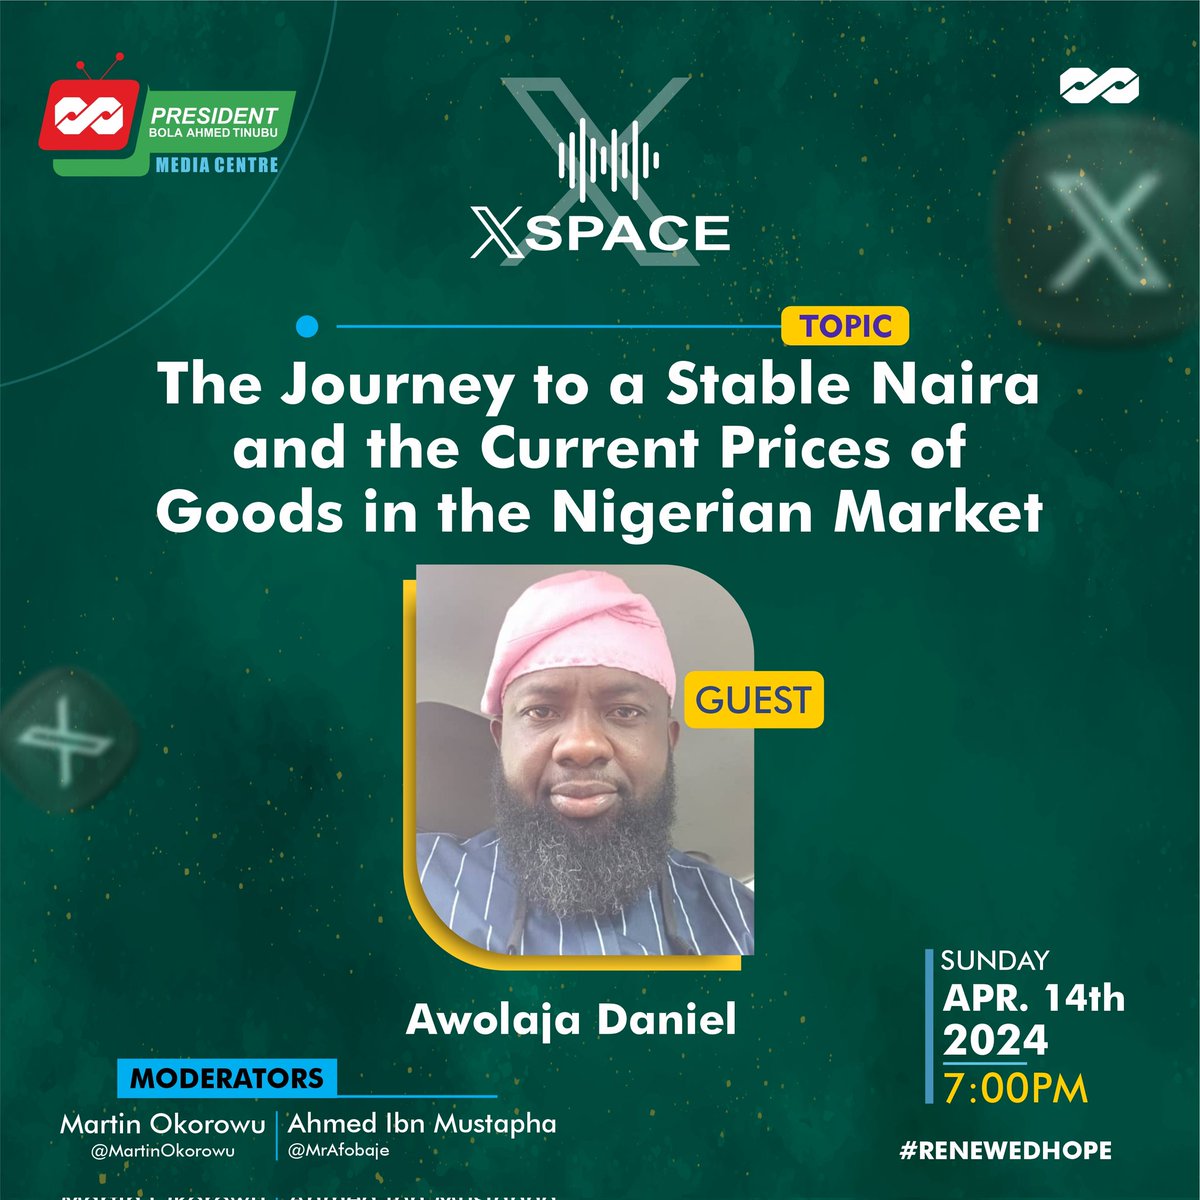 Tomorrow at 7pm, “The journey to a stable naira and Inflation in the Nigerian Markets” takes the centre stage of #PBATSpaces. Join the conversation as solutions and insights to navigate these economic waters will be discussed. Stay tuned 🕖